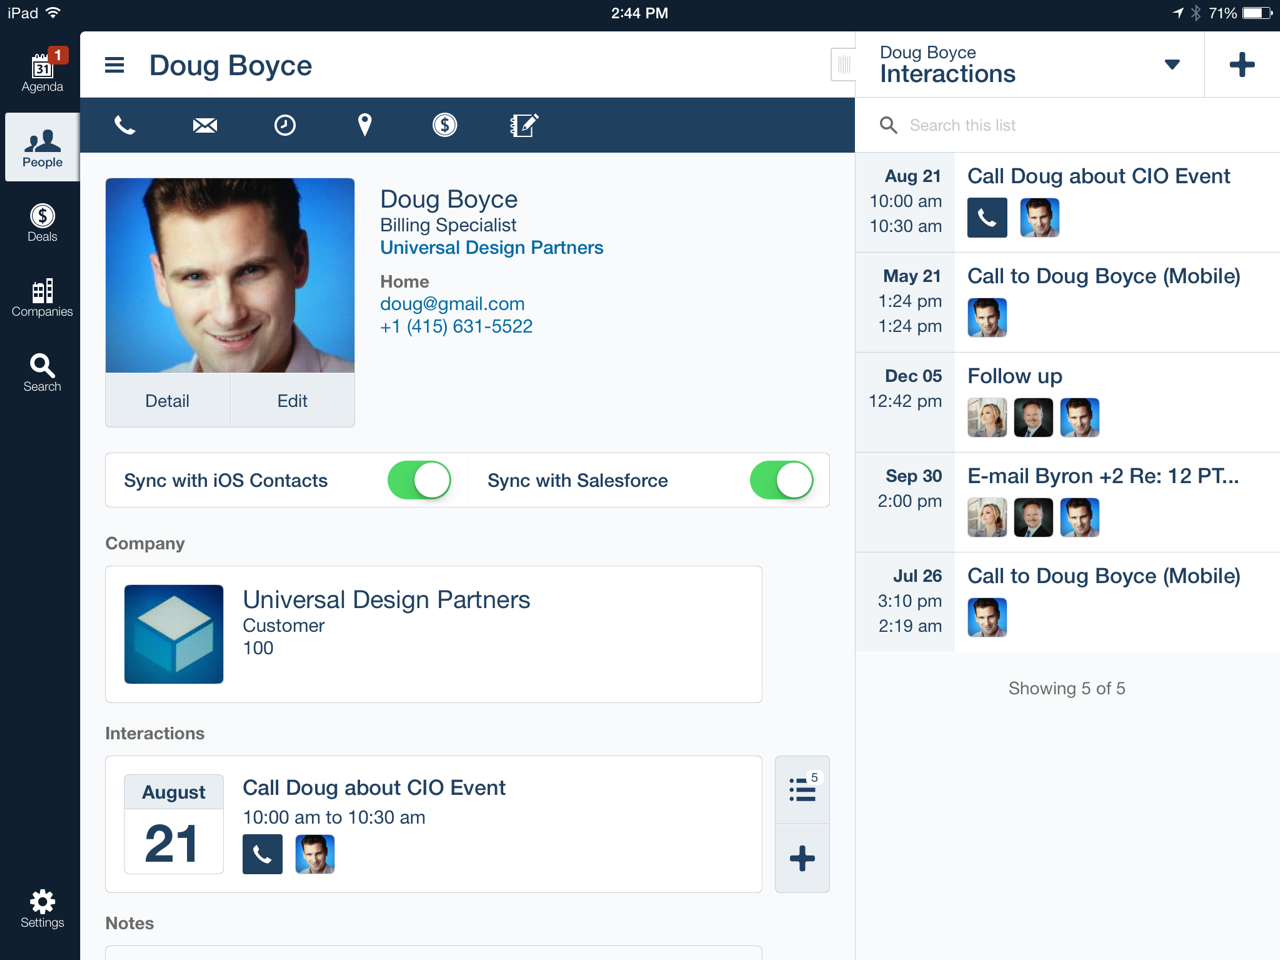 Version 2.0 of AppMesh, the sales rep's personal CRM